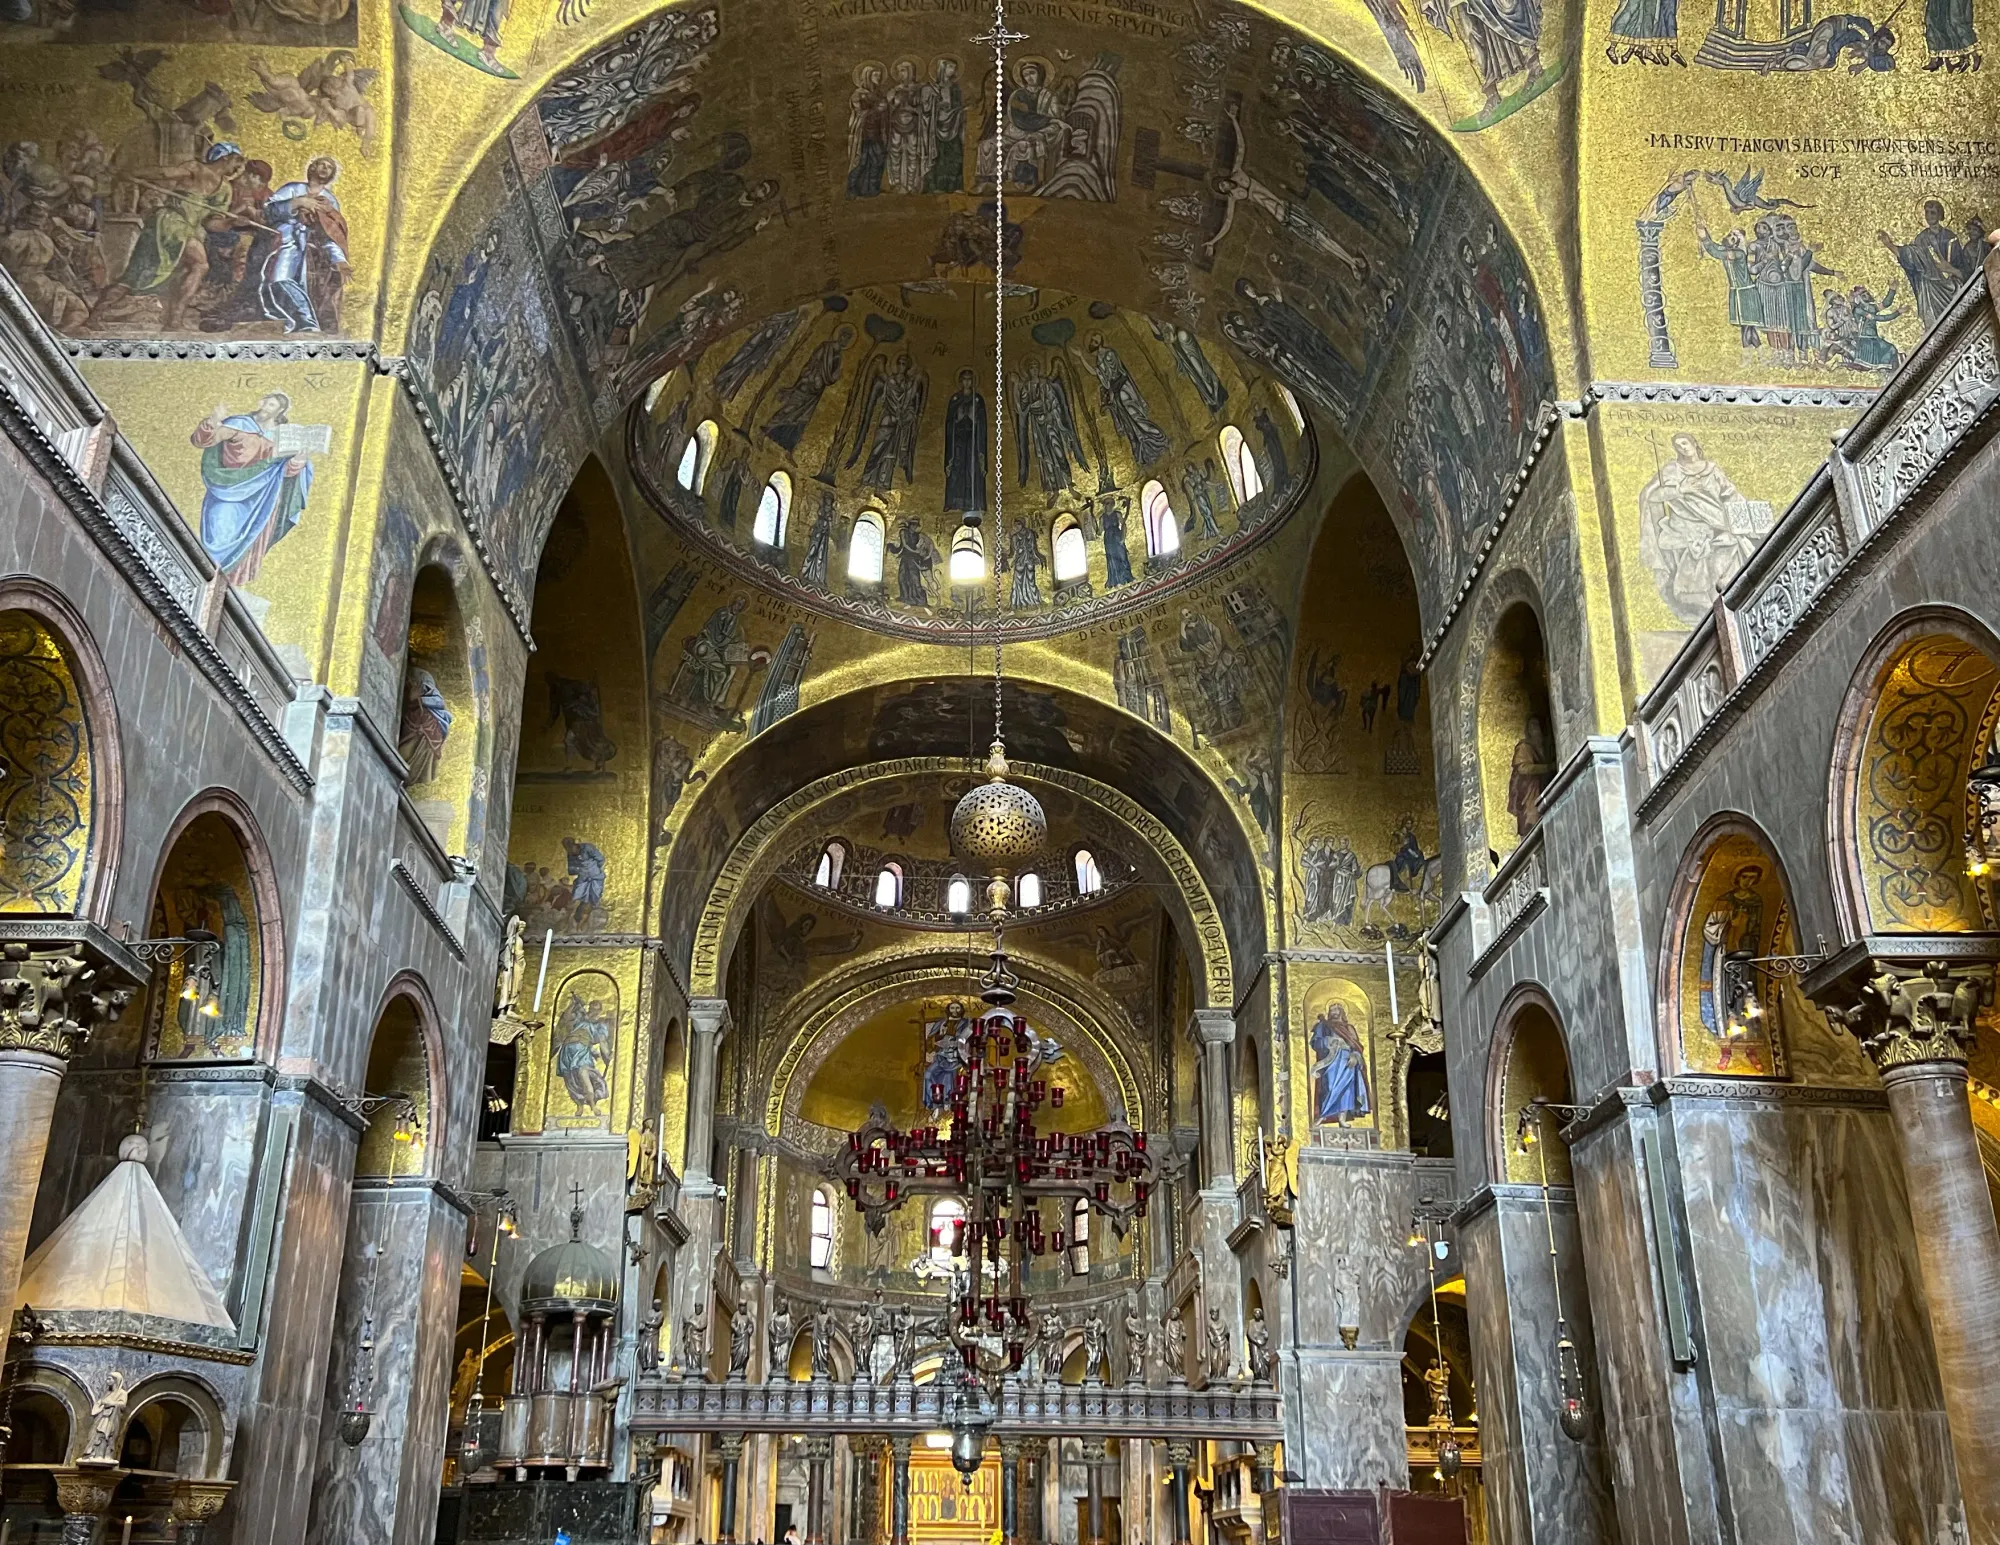 Golden mosaics on the roof of the basilica